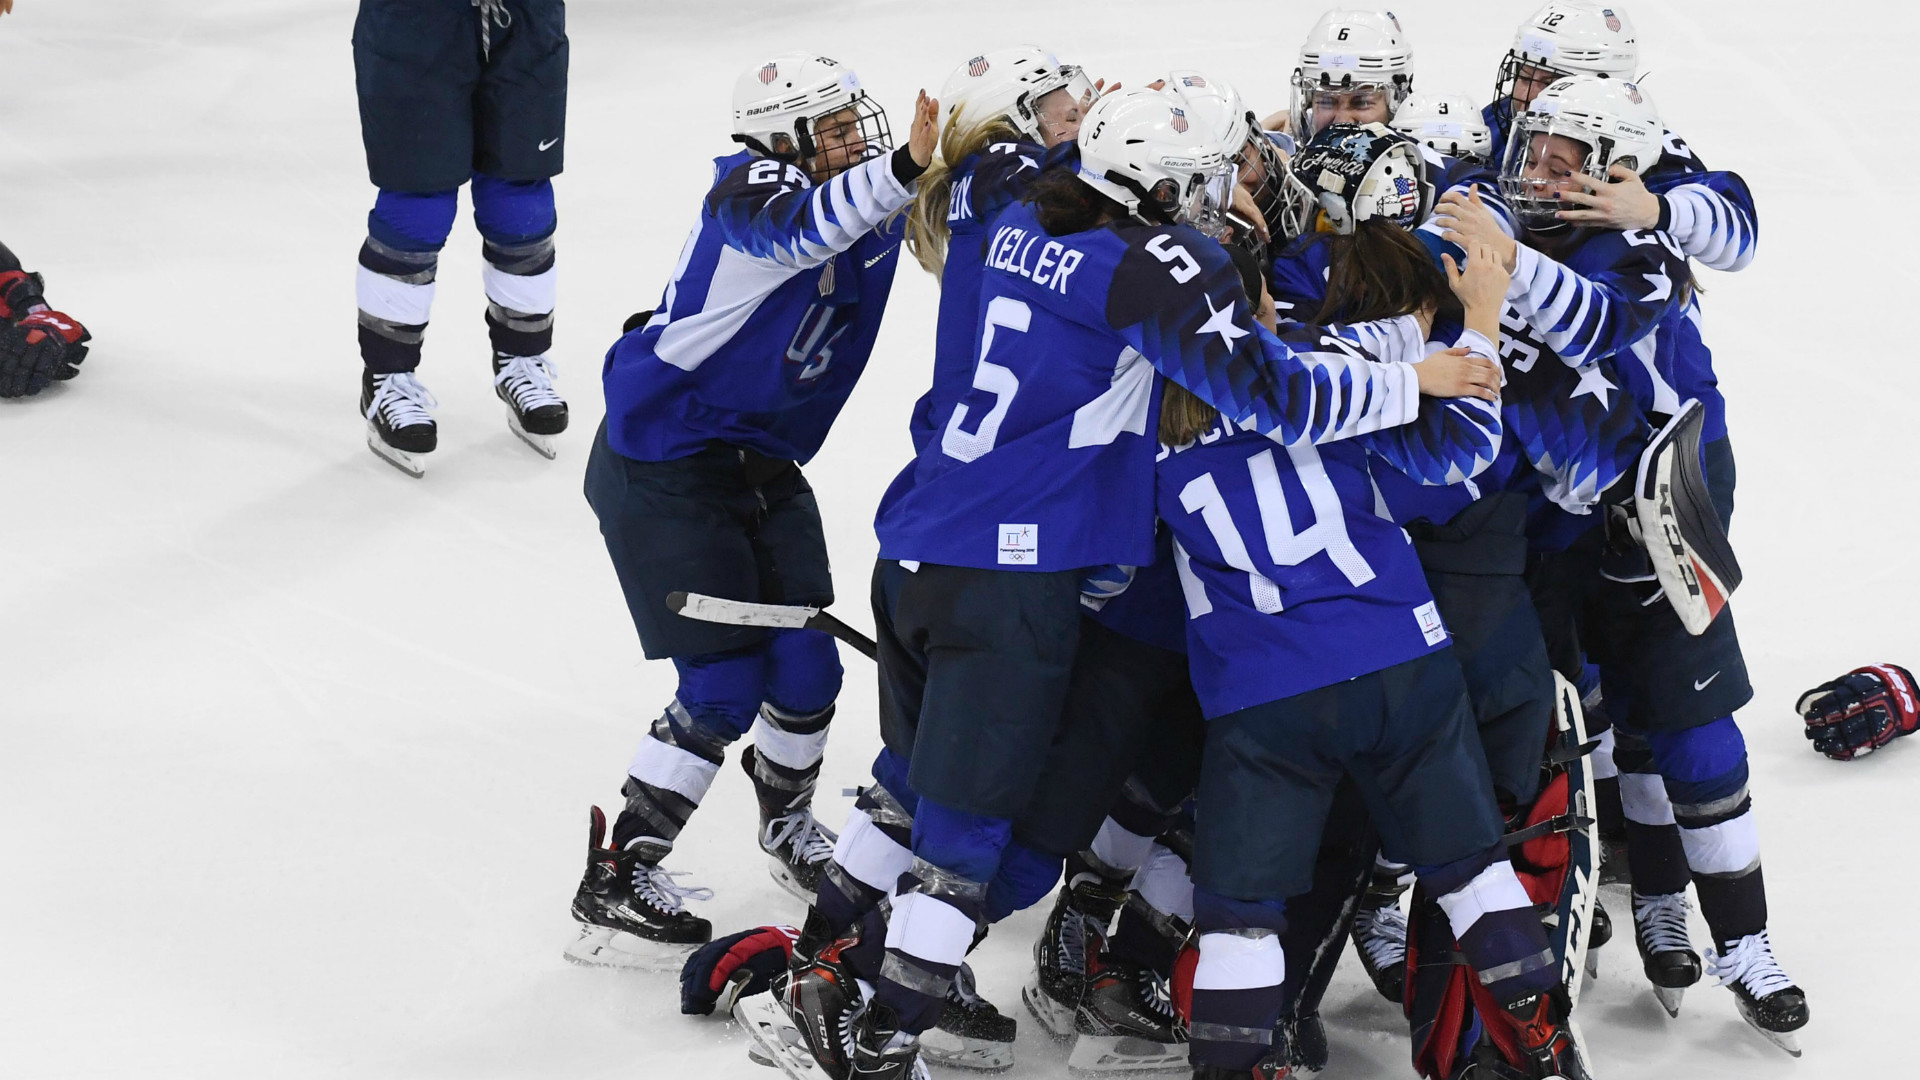 1920x1080 Team USA reclaims women's hockey gold from Canada in instant Olympic classic